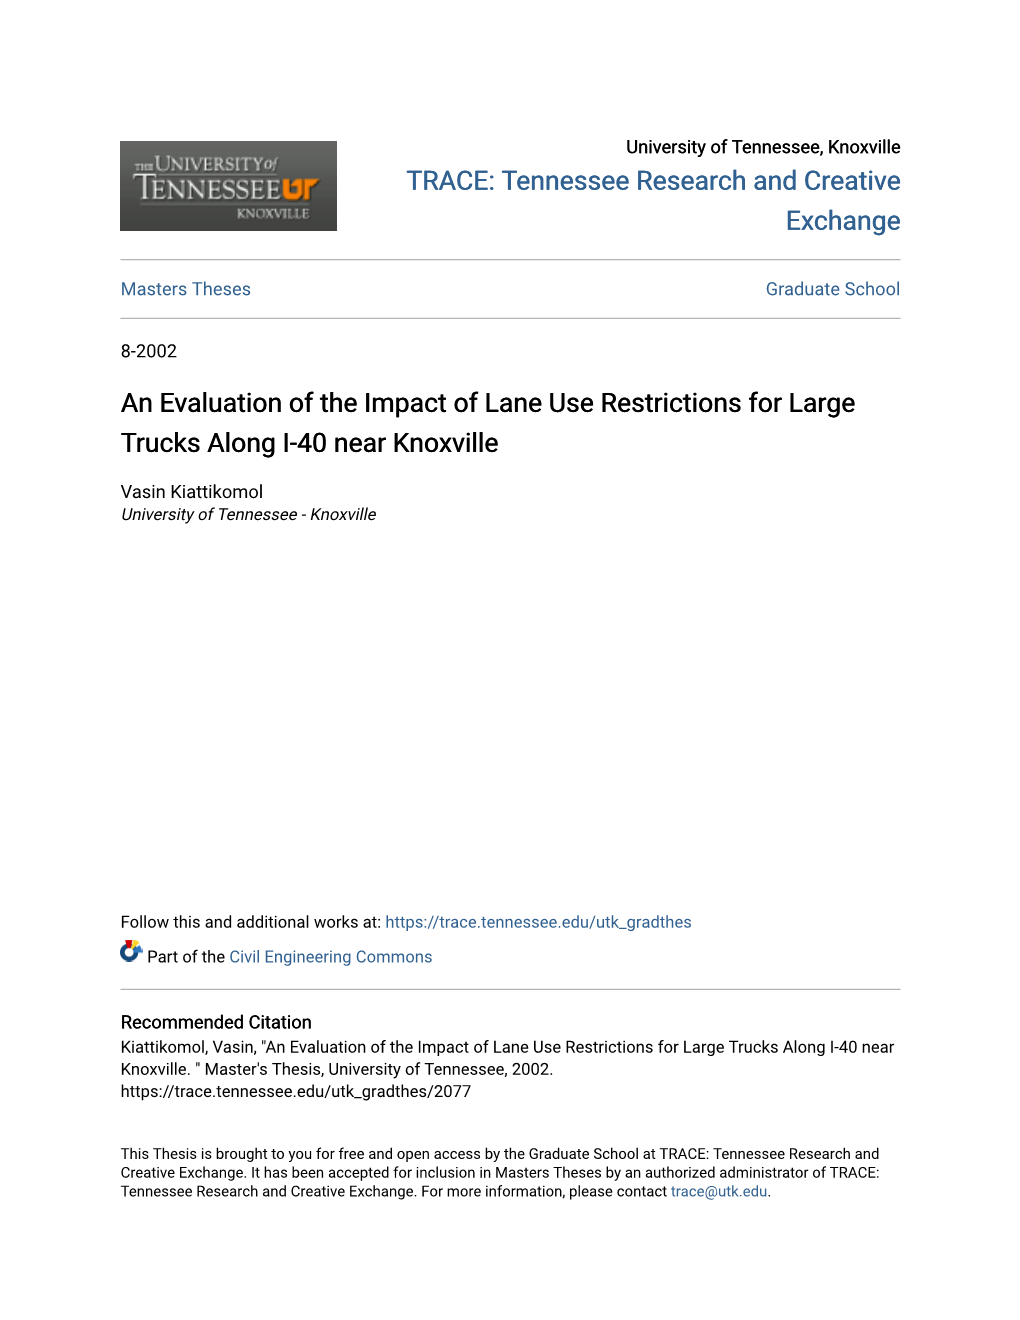 An Evaluation of the Impact of Lane Use Restrictions for Large Trucks Along I-40 Near Knoxville